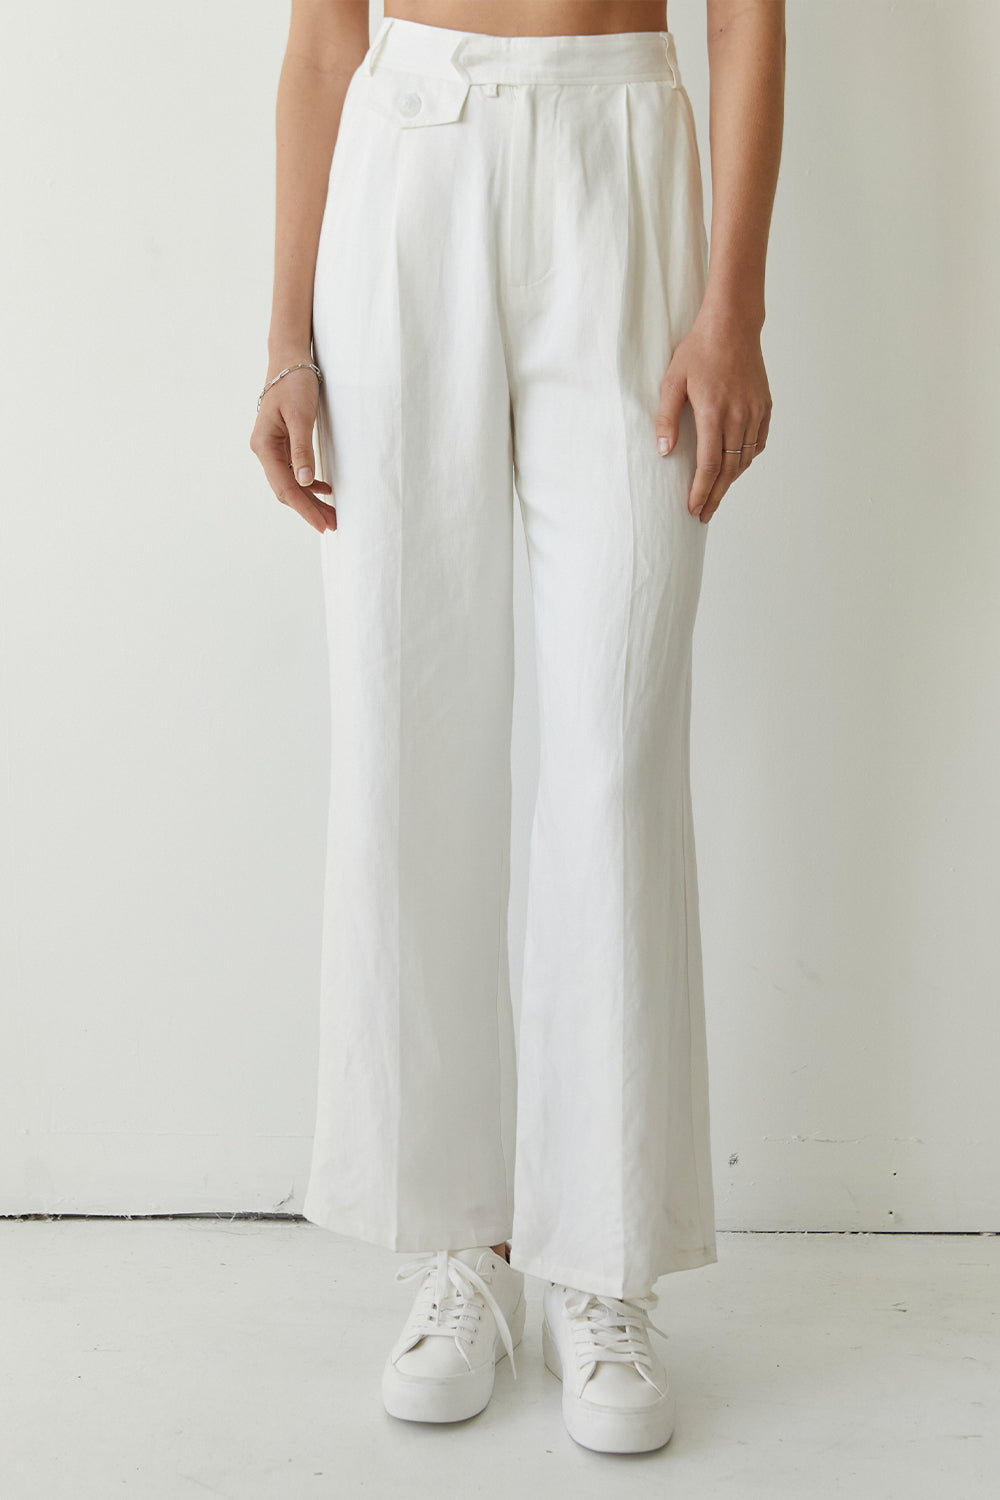 Off White Casual High - Waisted Parallel Cargo Trouser Pants for Women -  699 - EFab Enterprises at Rs 649.00, New Delhi | ID: 2852228870030